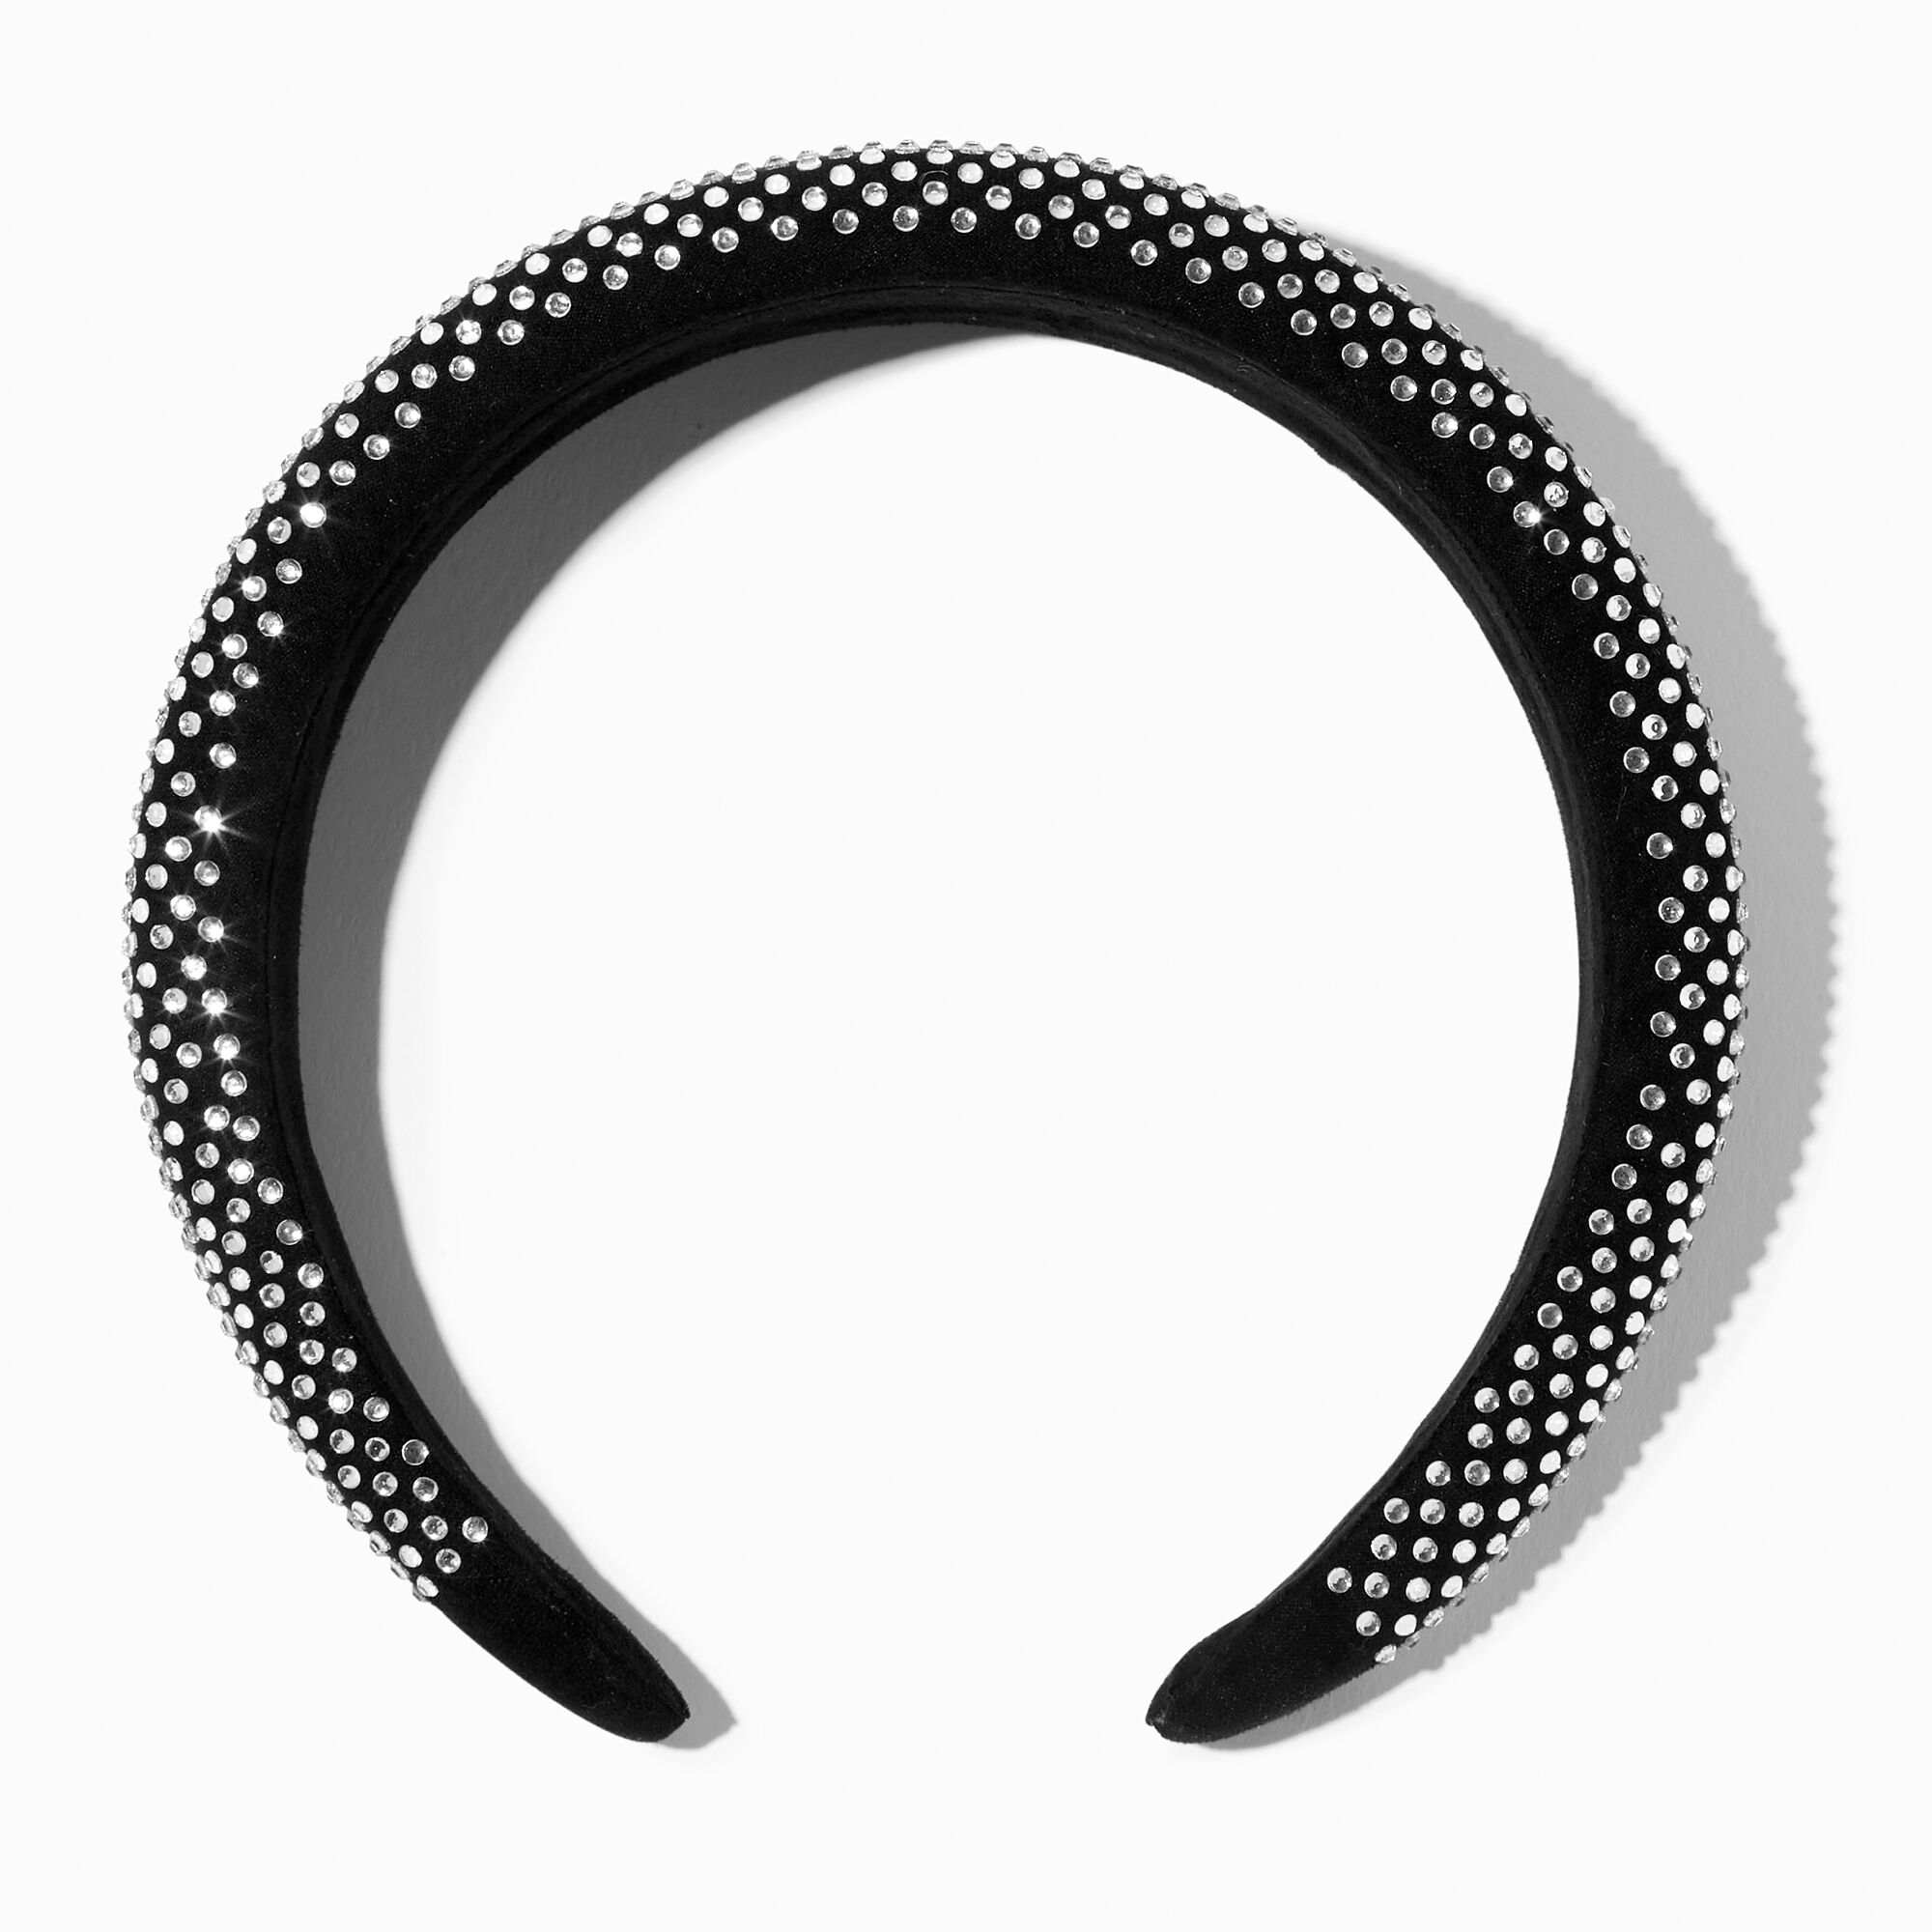 View Claires Embellished Puffy Headband Silver Black information